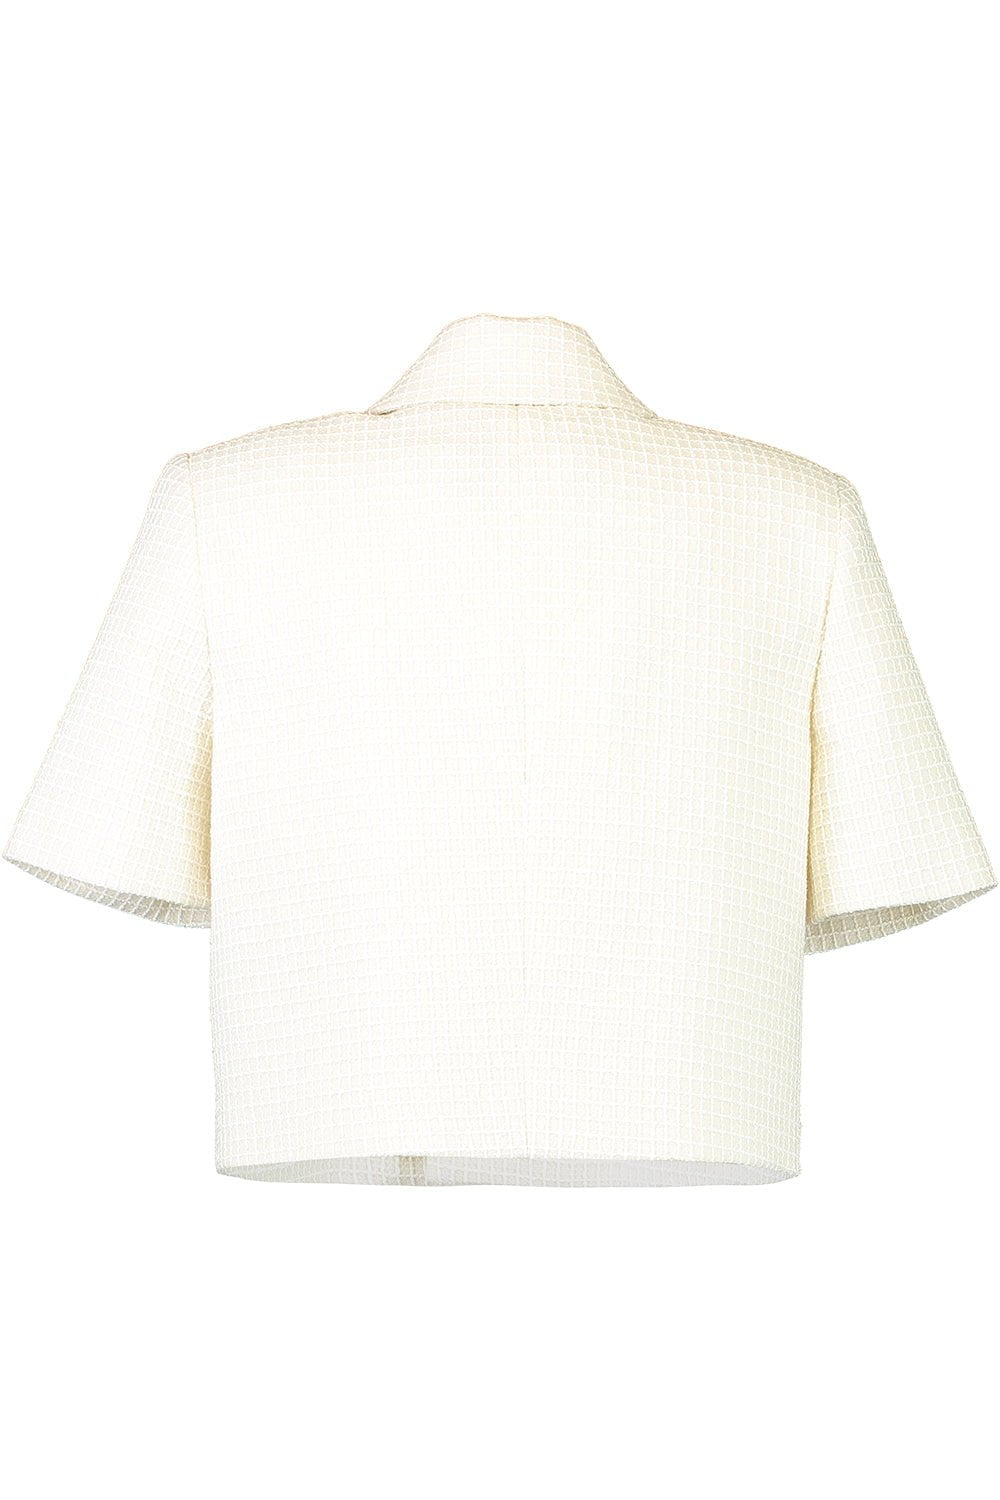 ADAM LIPPES-Cropped Marseille Jacket-